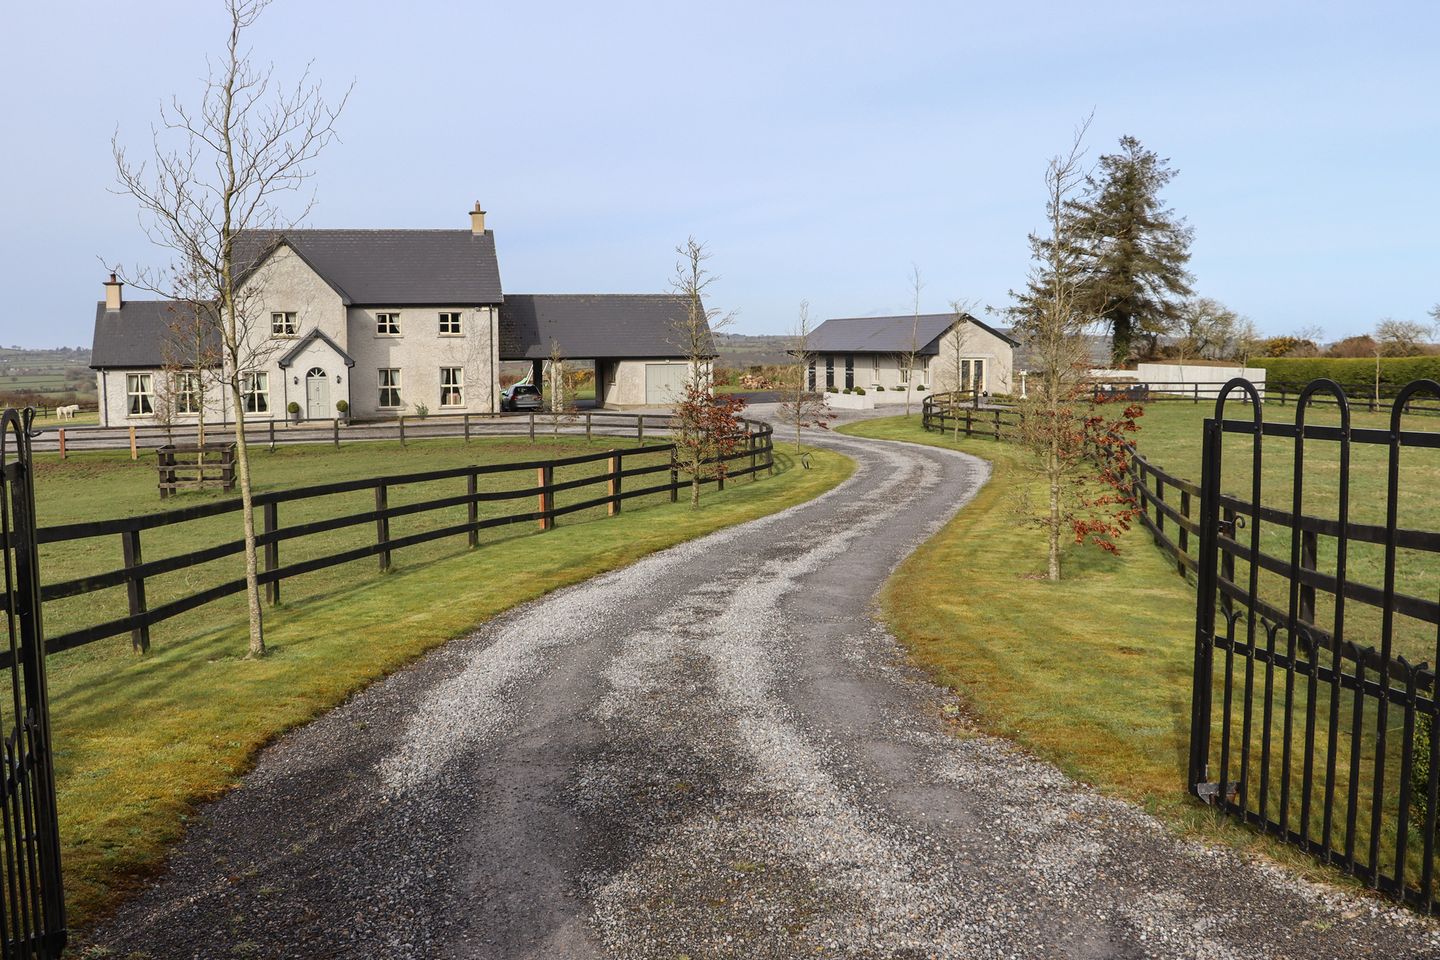 Ref. 1100932 The Lodge, Ballingarry Upper, Thurles, Tipperary Town, Co. Tipperary